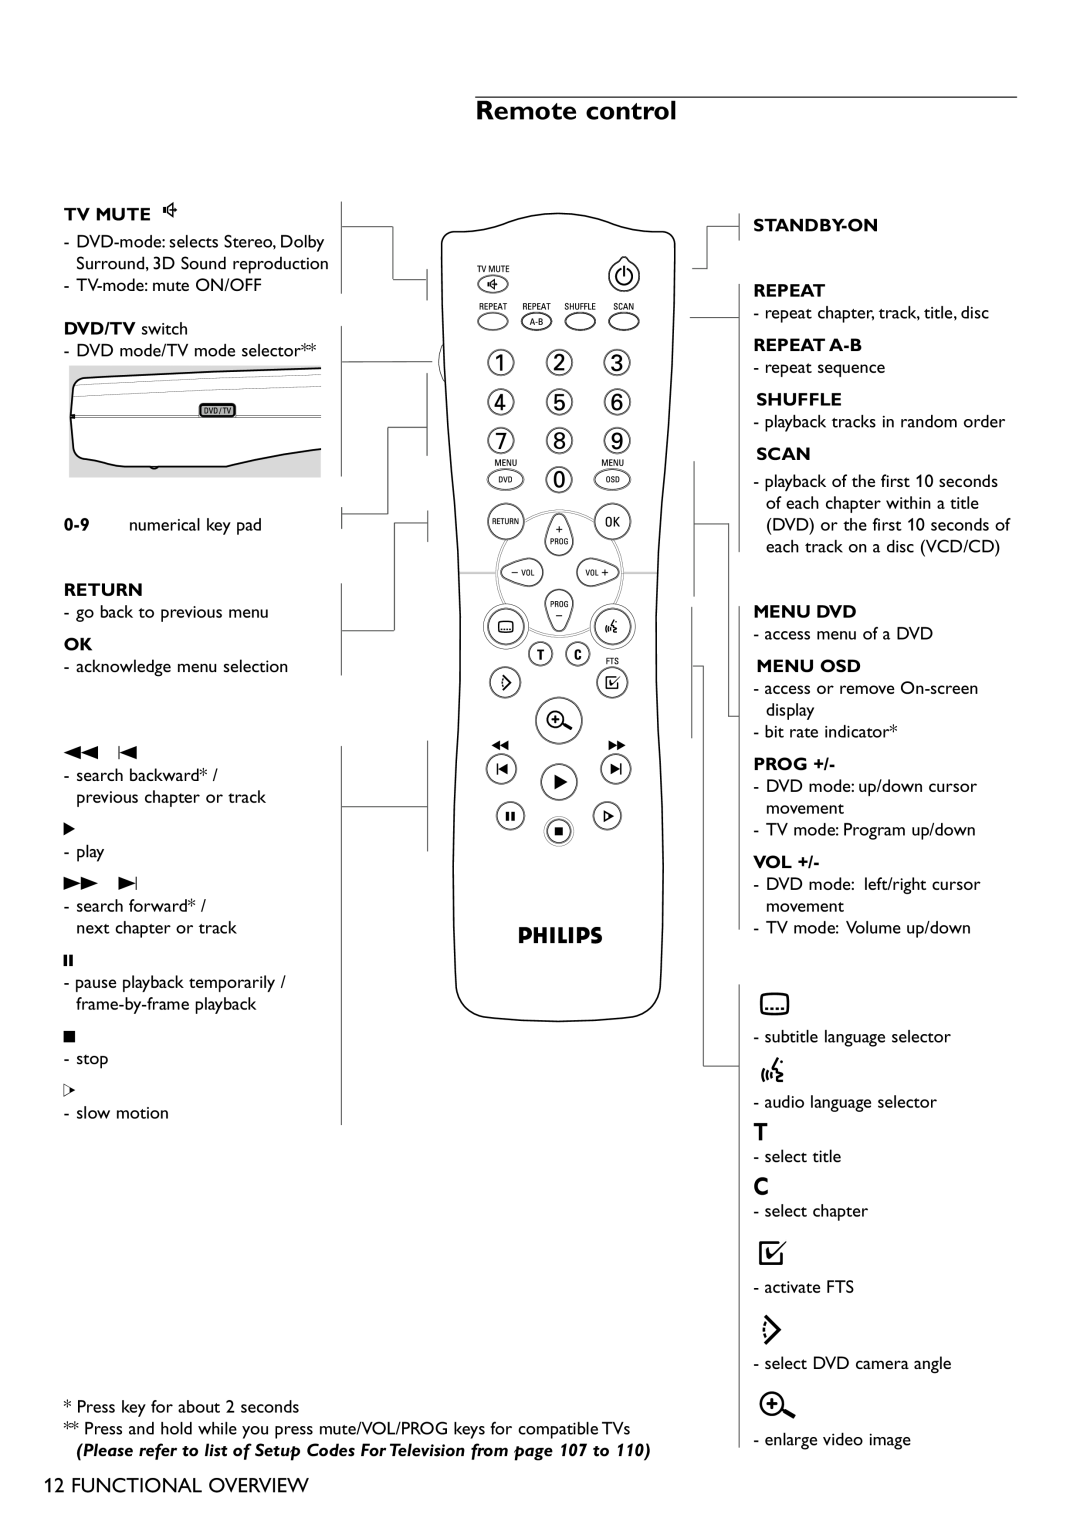 Philips DVD751 Remote control, Functional Overview, Tv Mute, DVD/TV switch, Return, Standby-On Repeat, Repeat A-B, Shuffle 